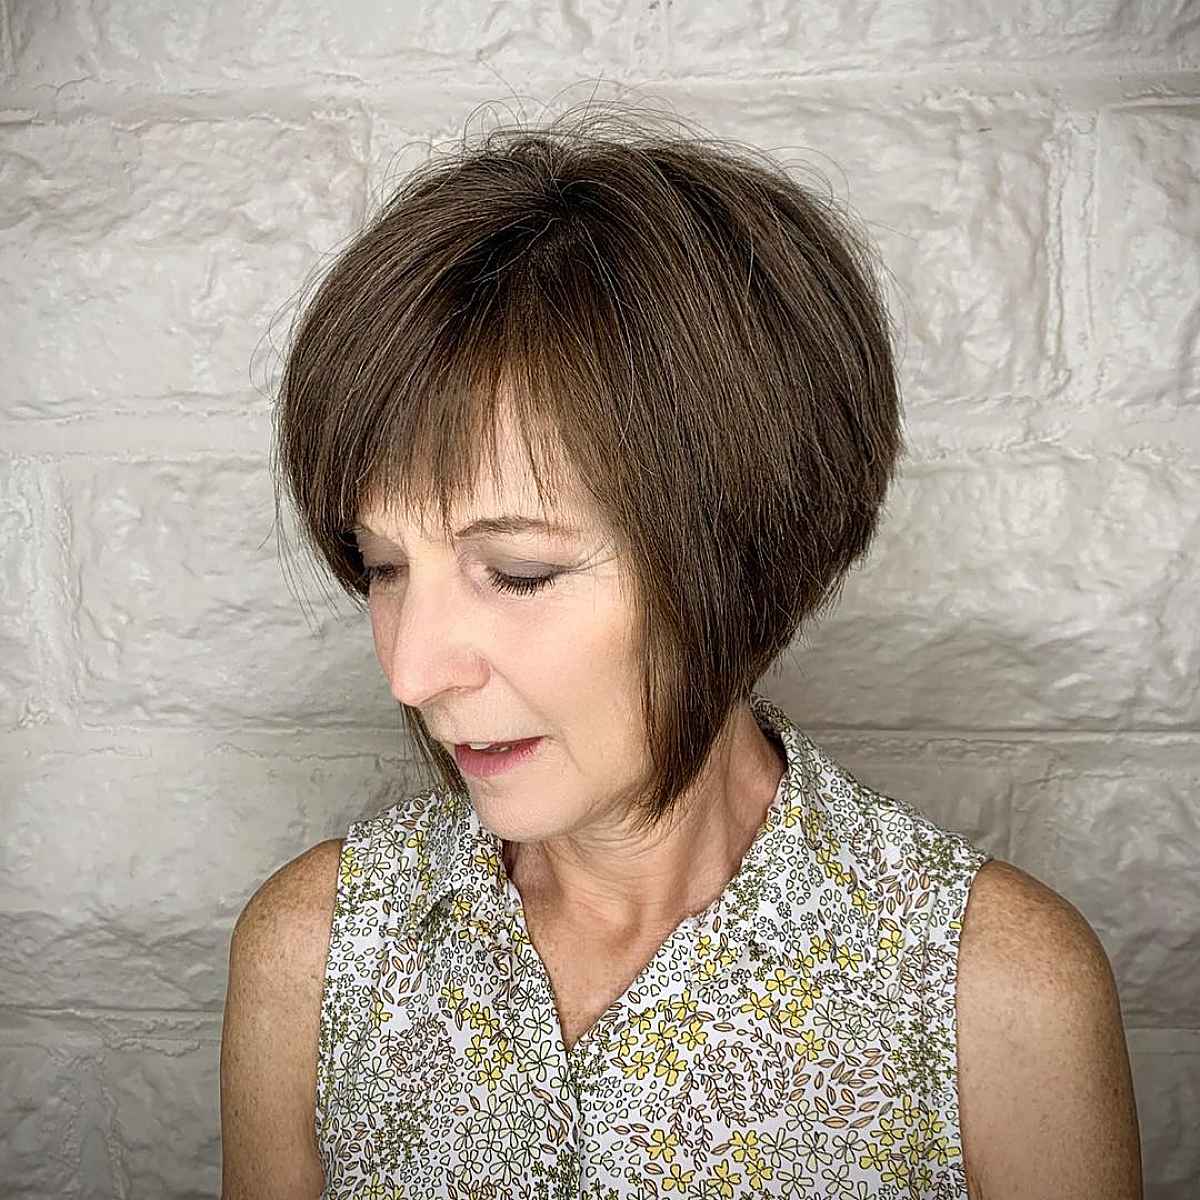 Short Angled Bob Haircut for a woman in her 60s